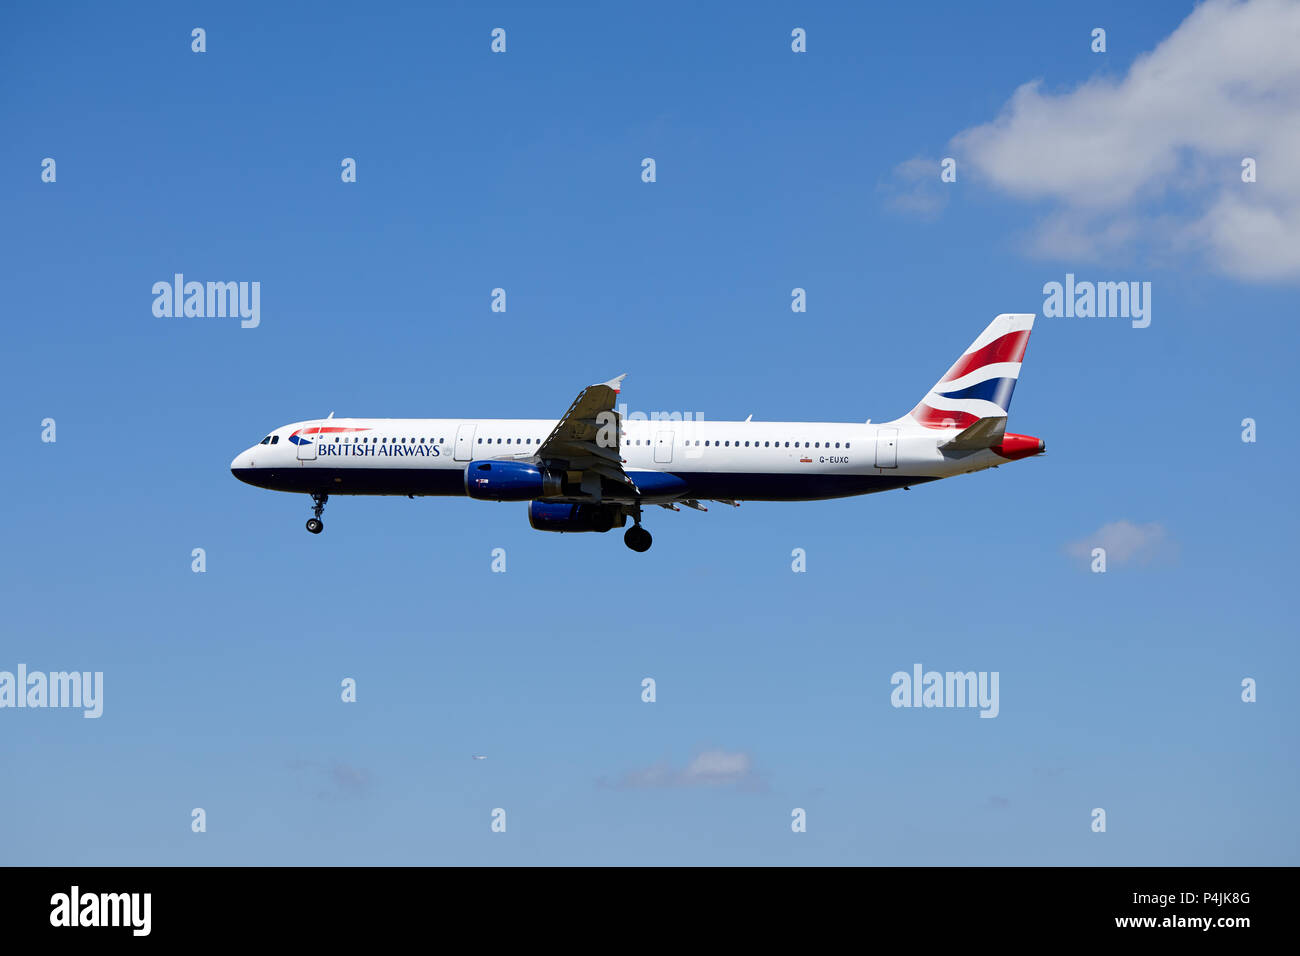 A British Airways Airbus A321-231 aircraft, registration number G-EUXC, approaching a landing. Stock Photo